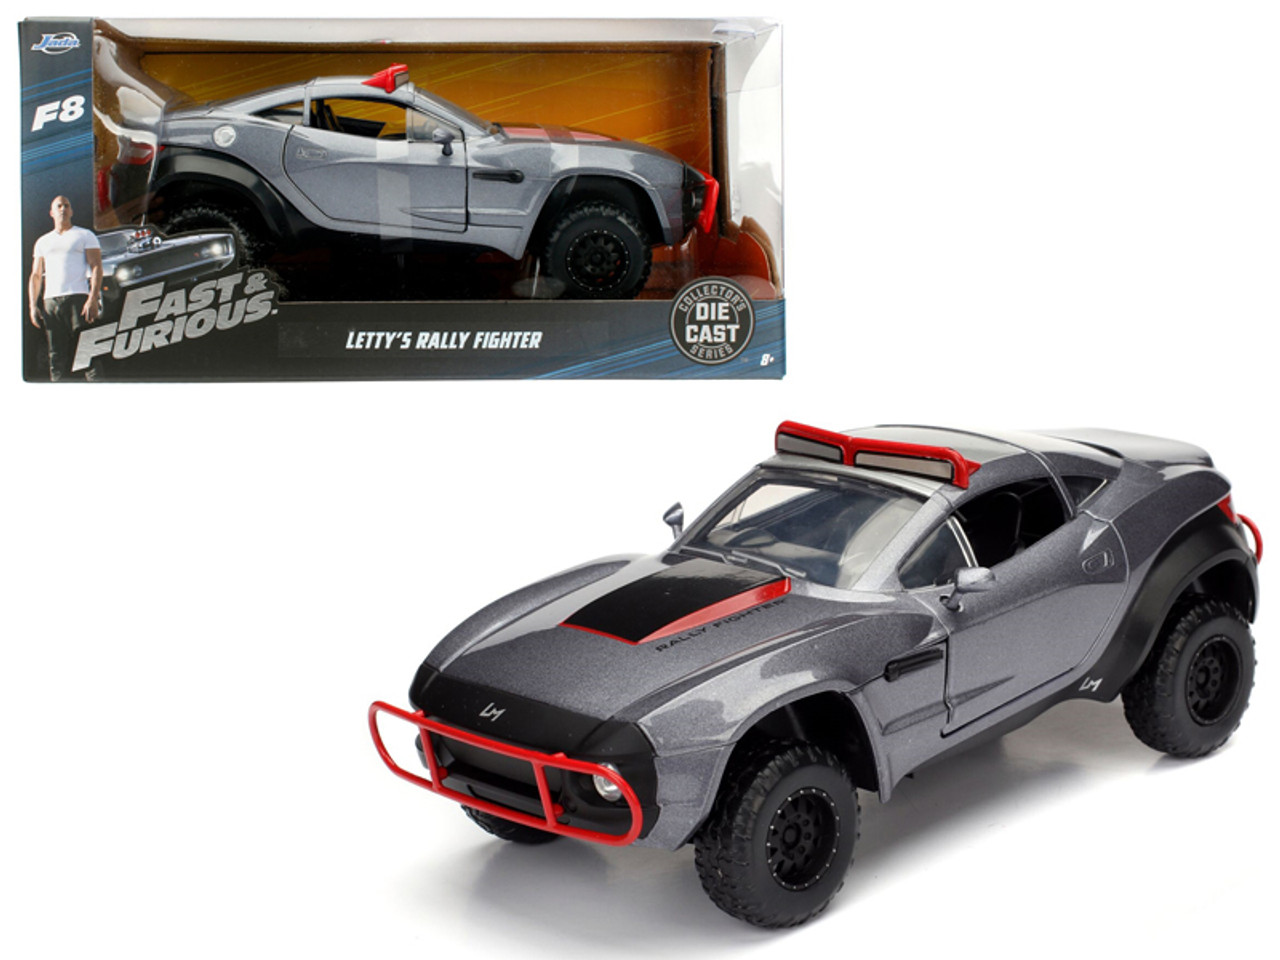 Letty's Rally Fighter Fast & Furious F8 "The Fate of the Furious" Movie 1/24 Diecast Model Car by Jada